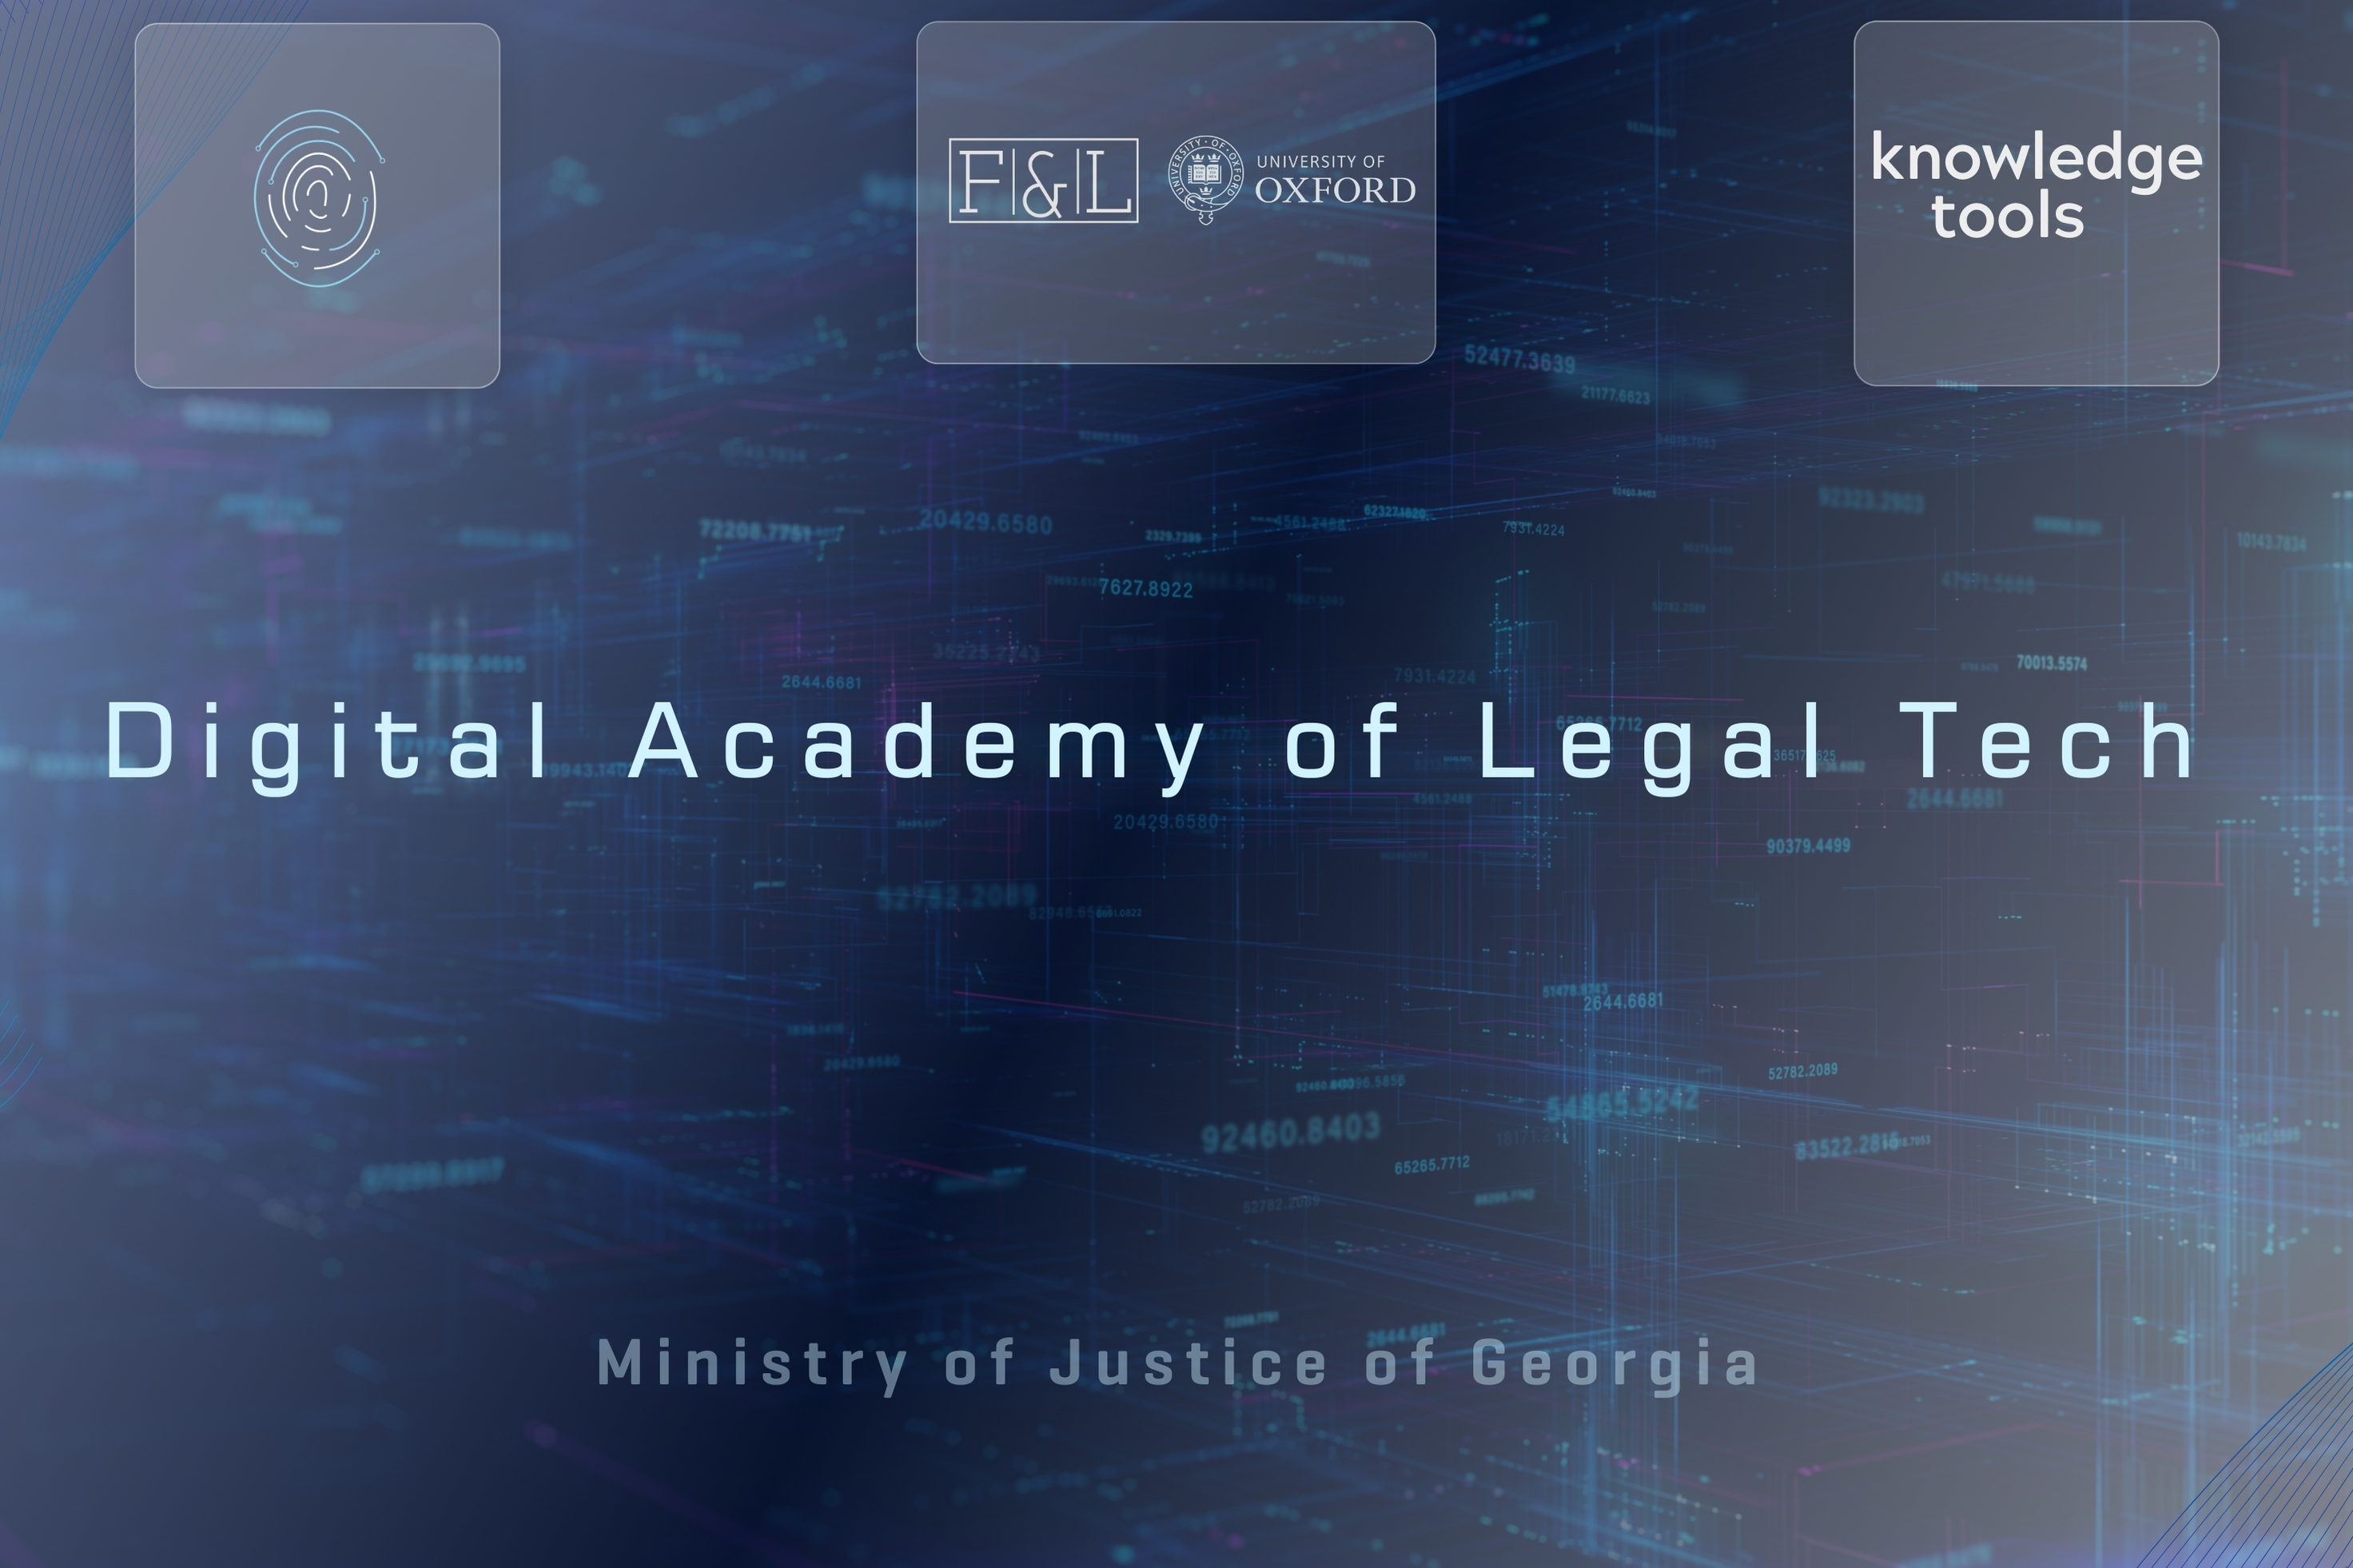 OFLS launches Digital Academy of Legal Tech for the Ministry of Justice of Georgia